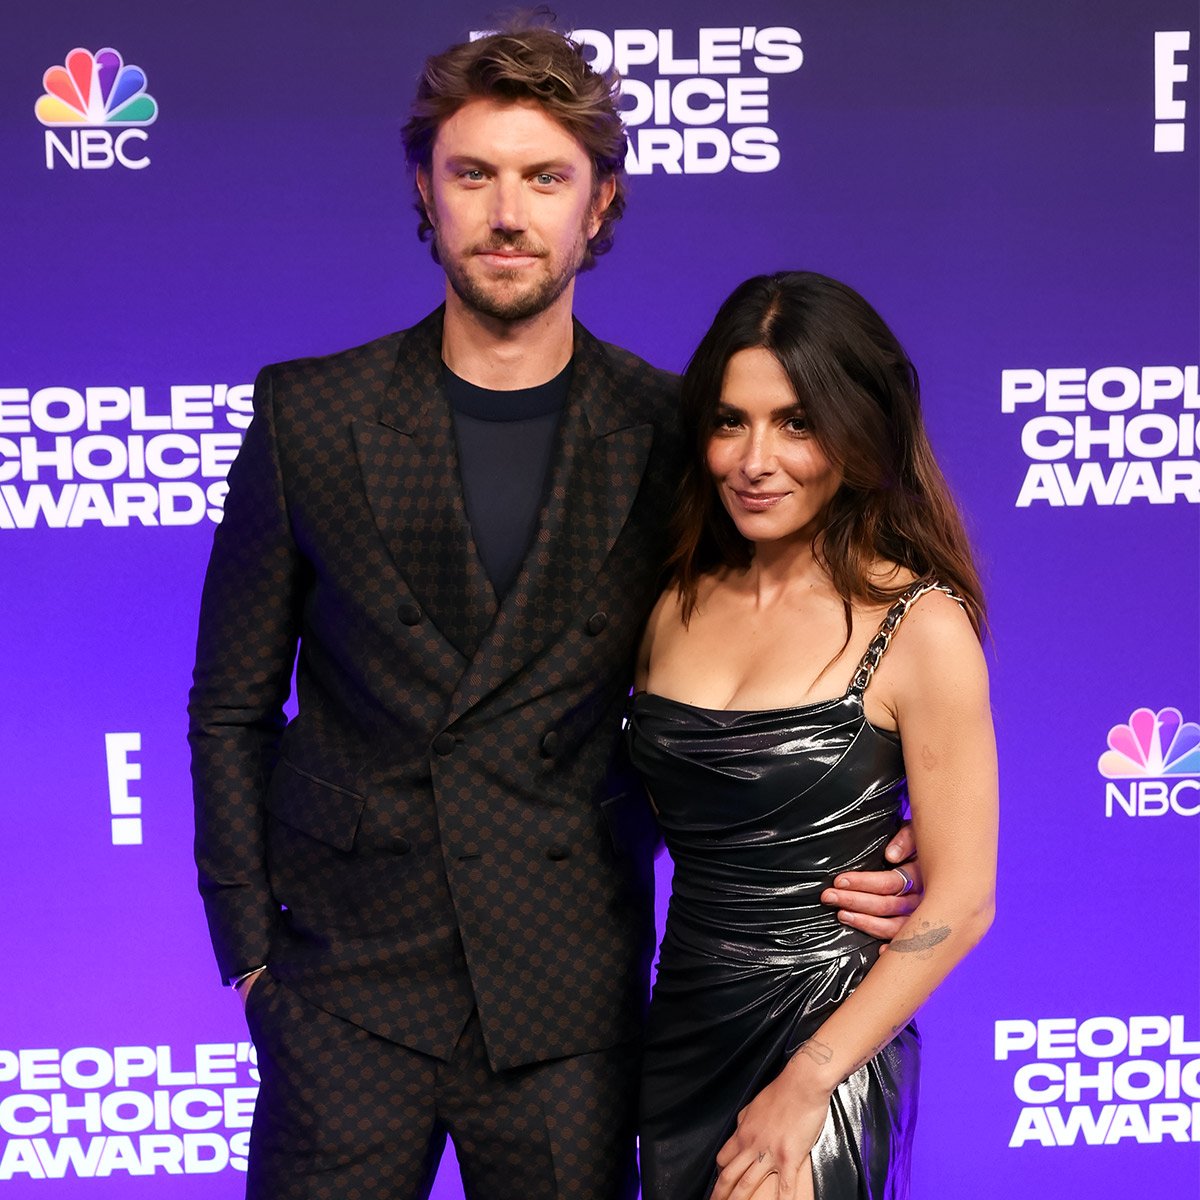 Shawn Johnson, Anderson East and More Couples Who Turned Up the Heat the 2021 People's Choice Awards